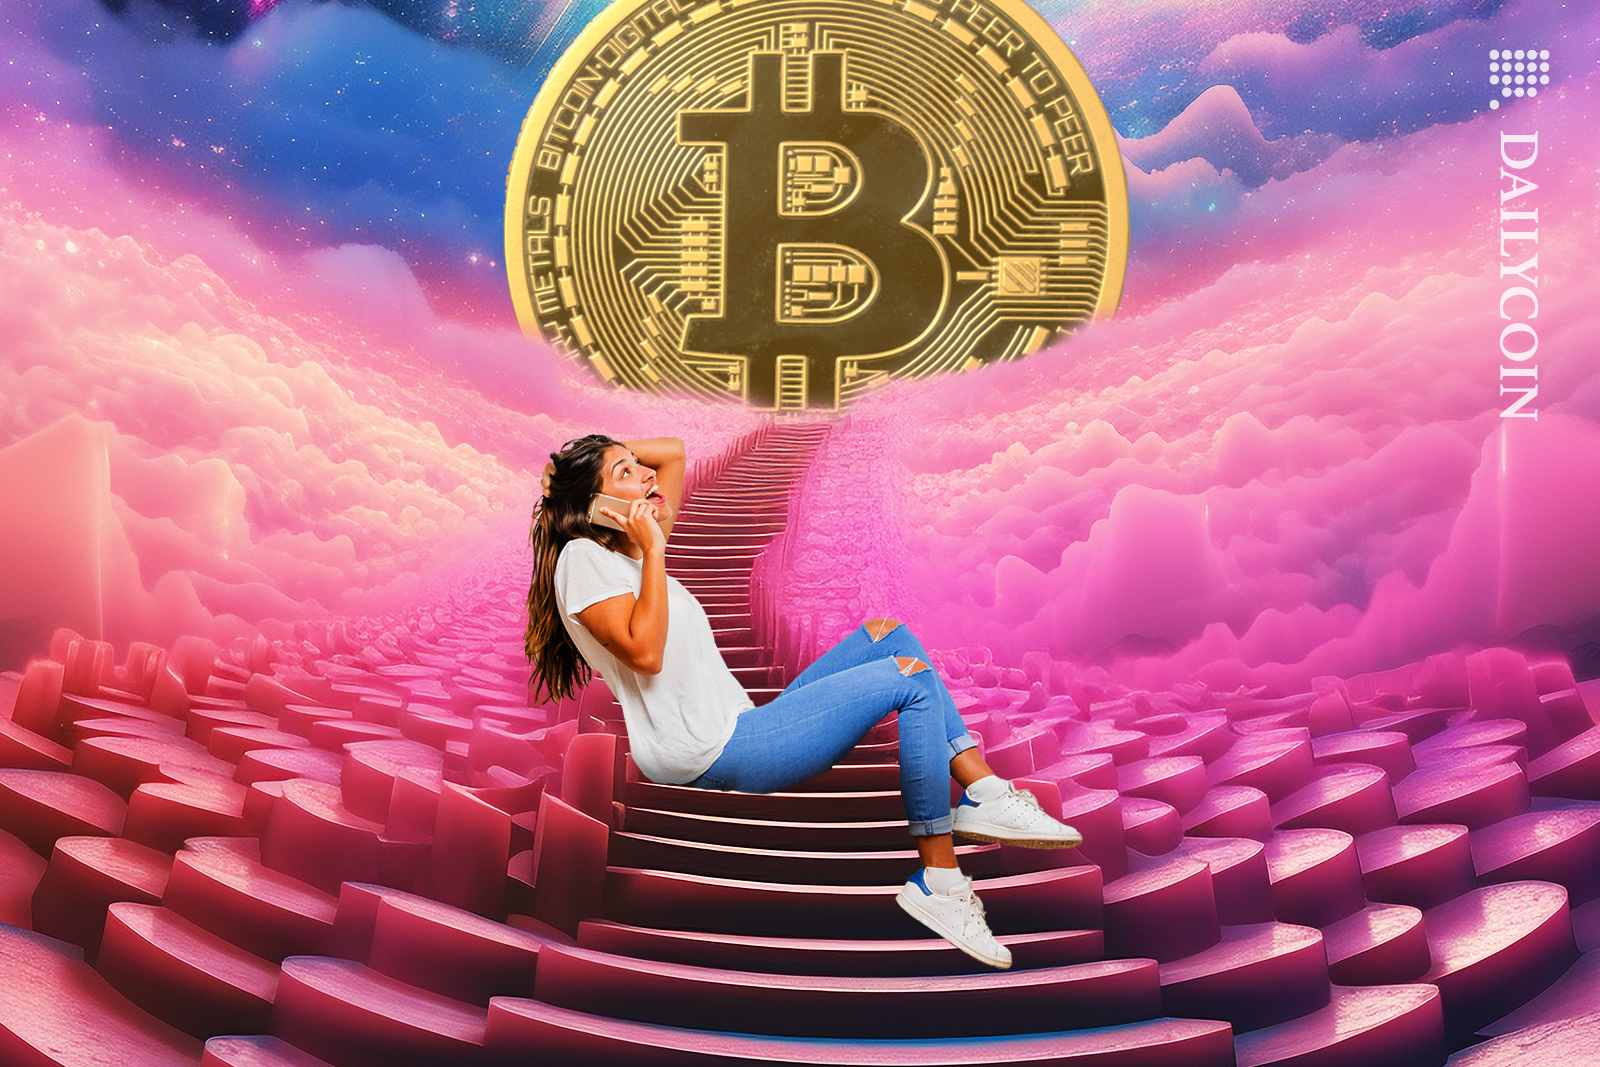 Girl on the phone cannot believe how far bitcoin has come.